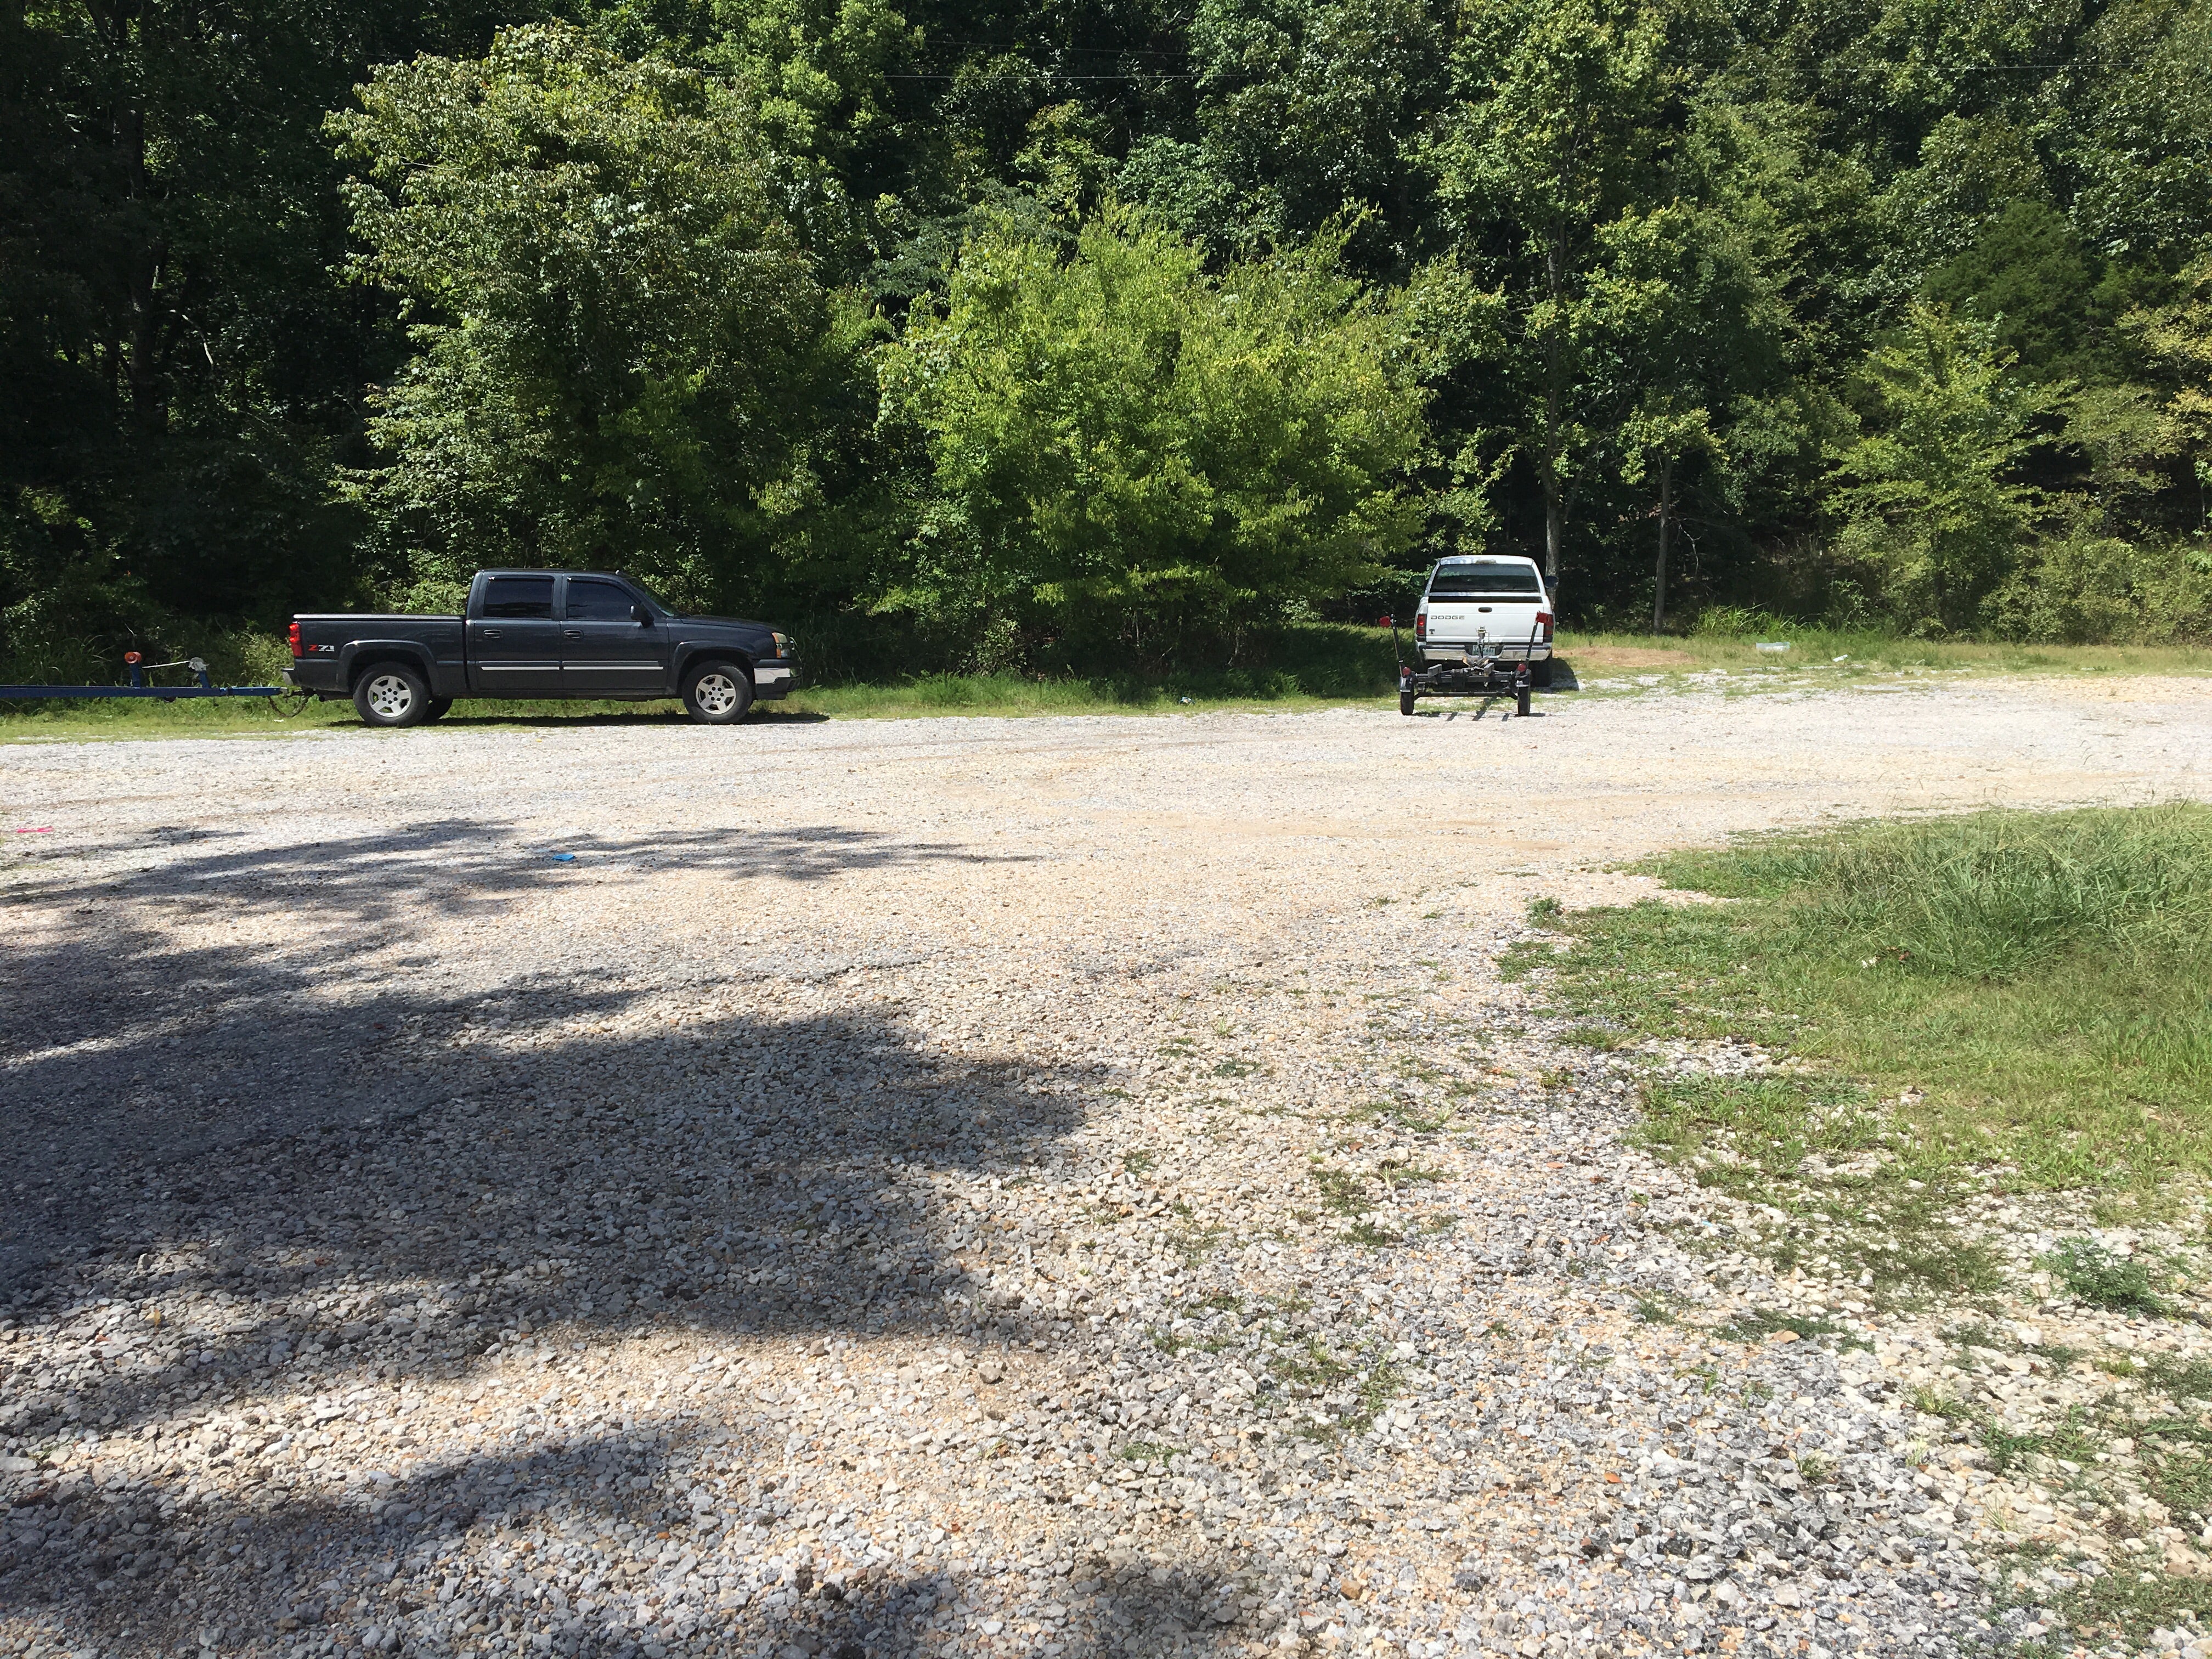 Area to park in right across from boat ramp